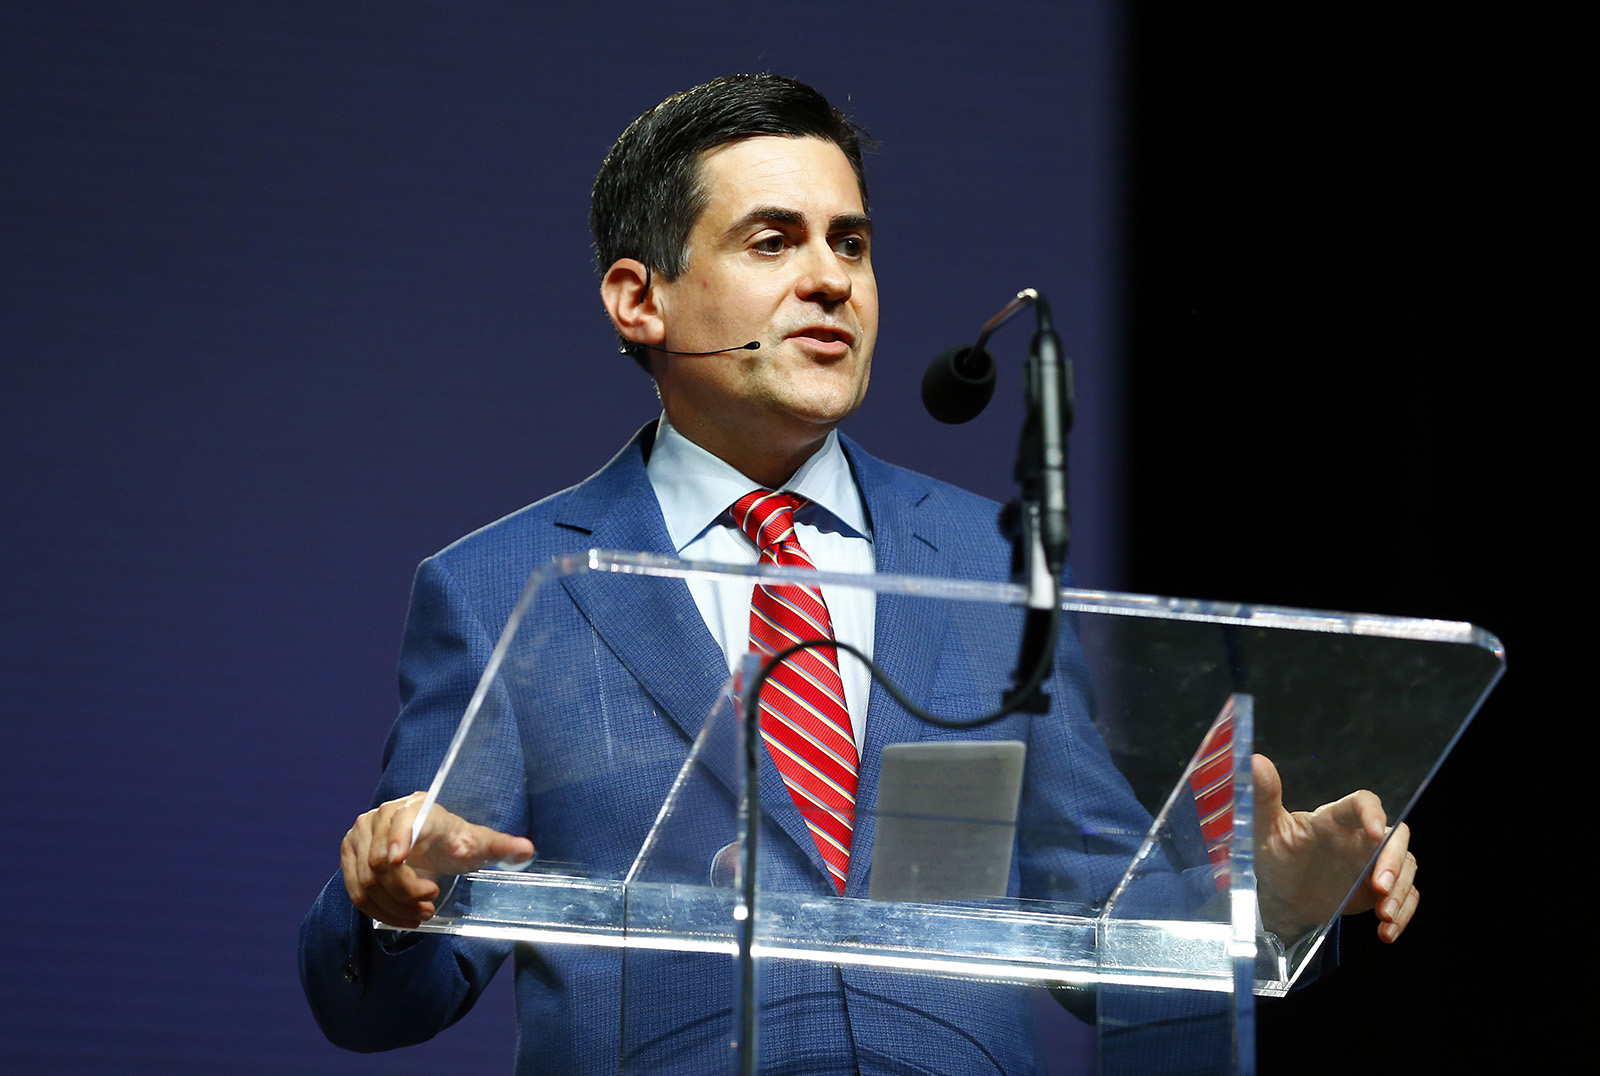 Russell Moore, president of the Southern Baptist Convention’s Ethics and Religious Liberty Commission, speaks June 12, 2019, during the annual meeting of the Southern Baptist Convention at the Birmingham-Jefferson Convention Complex in Birmingham, Alabama. RNS photo by Butch Dill